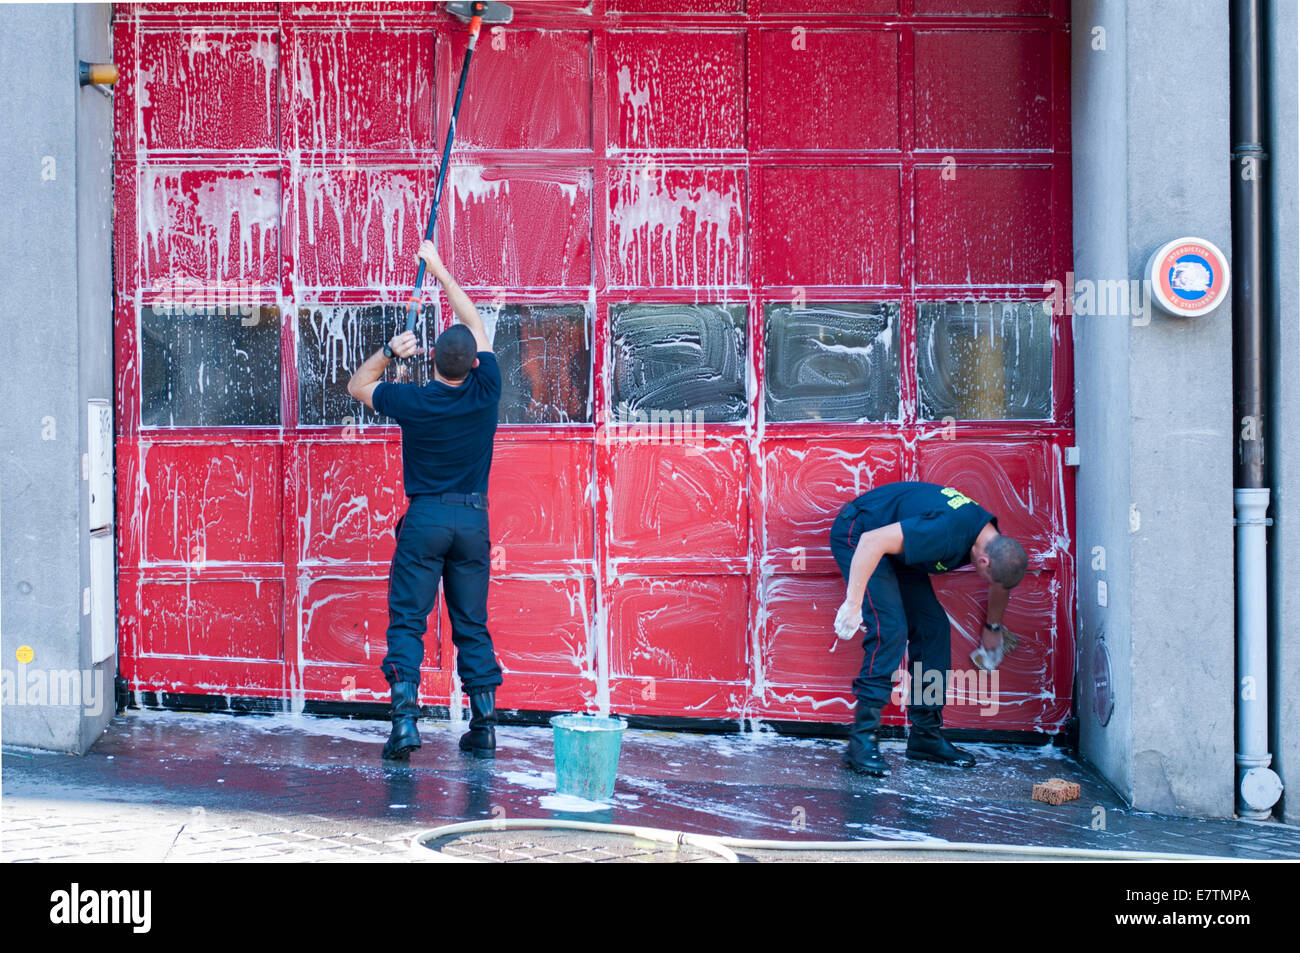 Two Parisian fireman wash the door to the firehouse Stock Photo